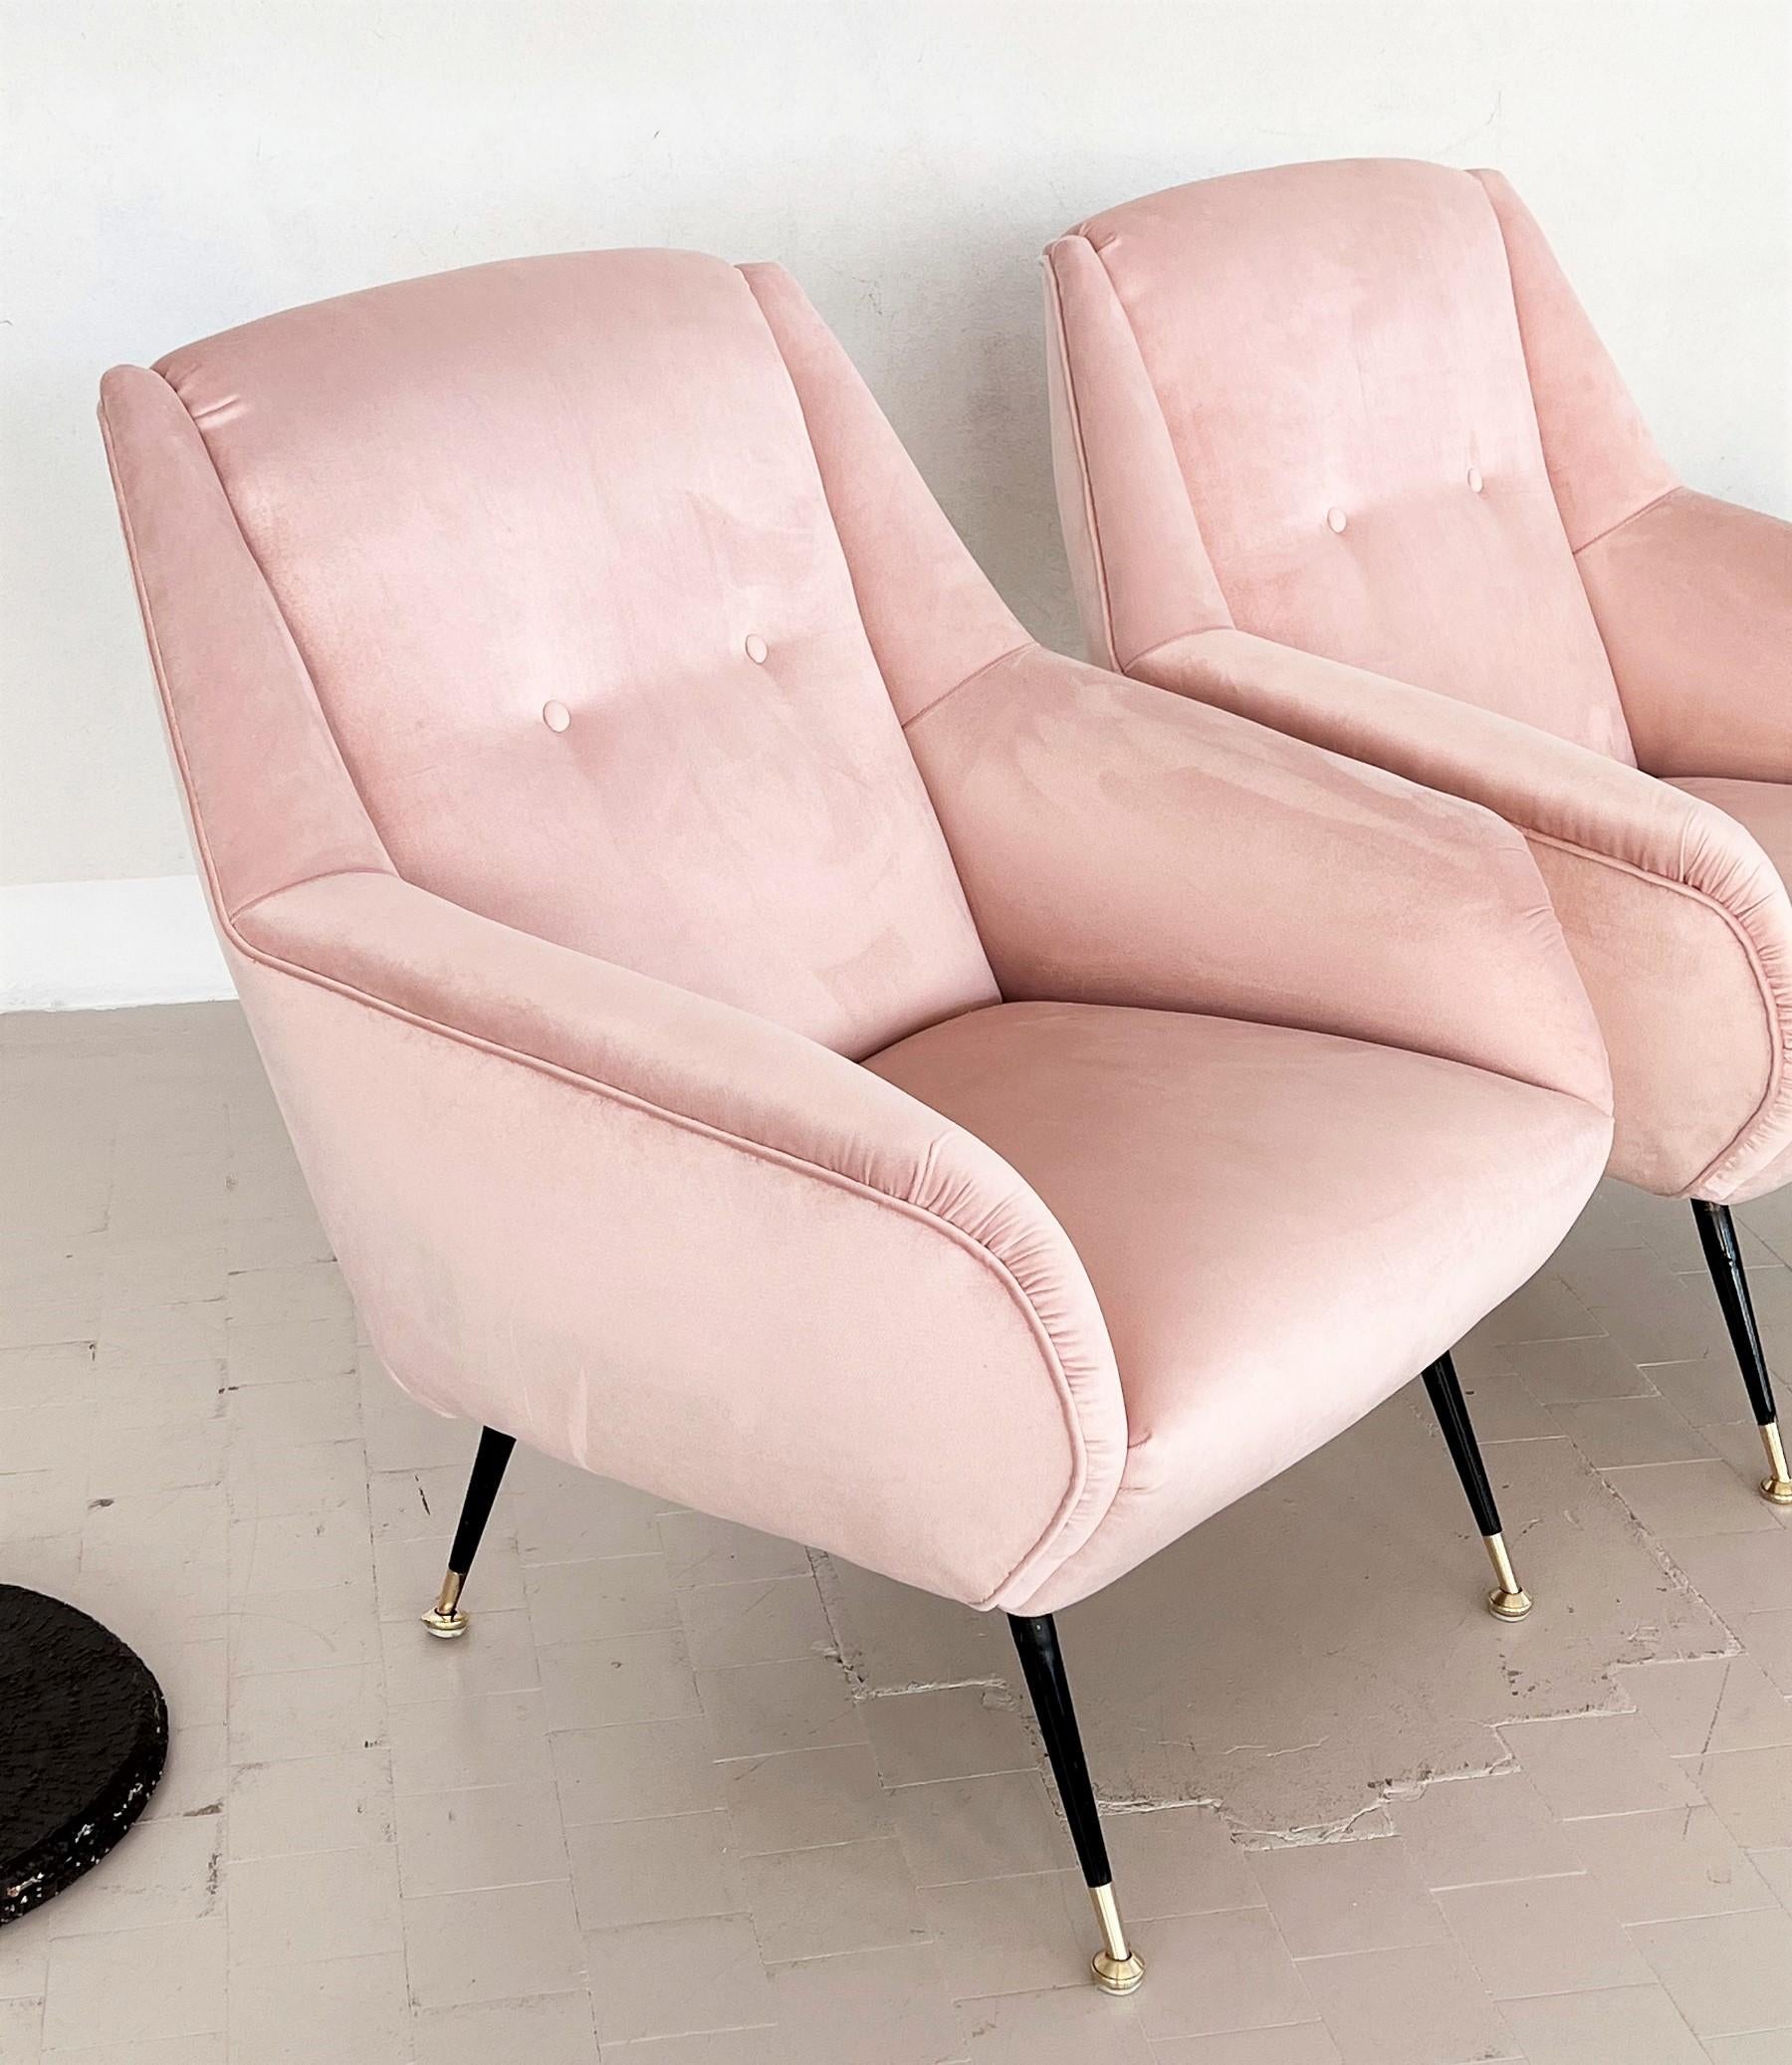 Italian Midcentury Armchairs in Soft Pink Velvet and Brass Tips, 1950s For Sale 6